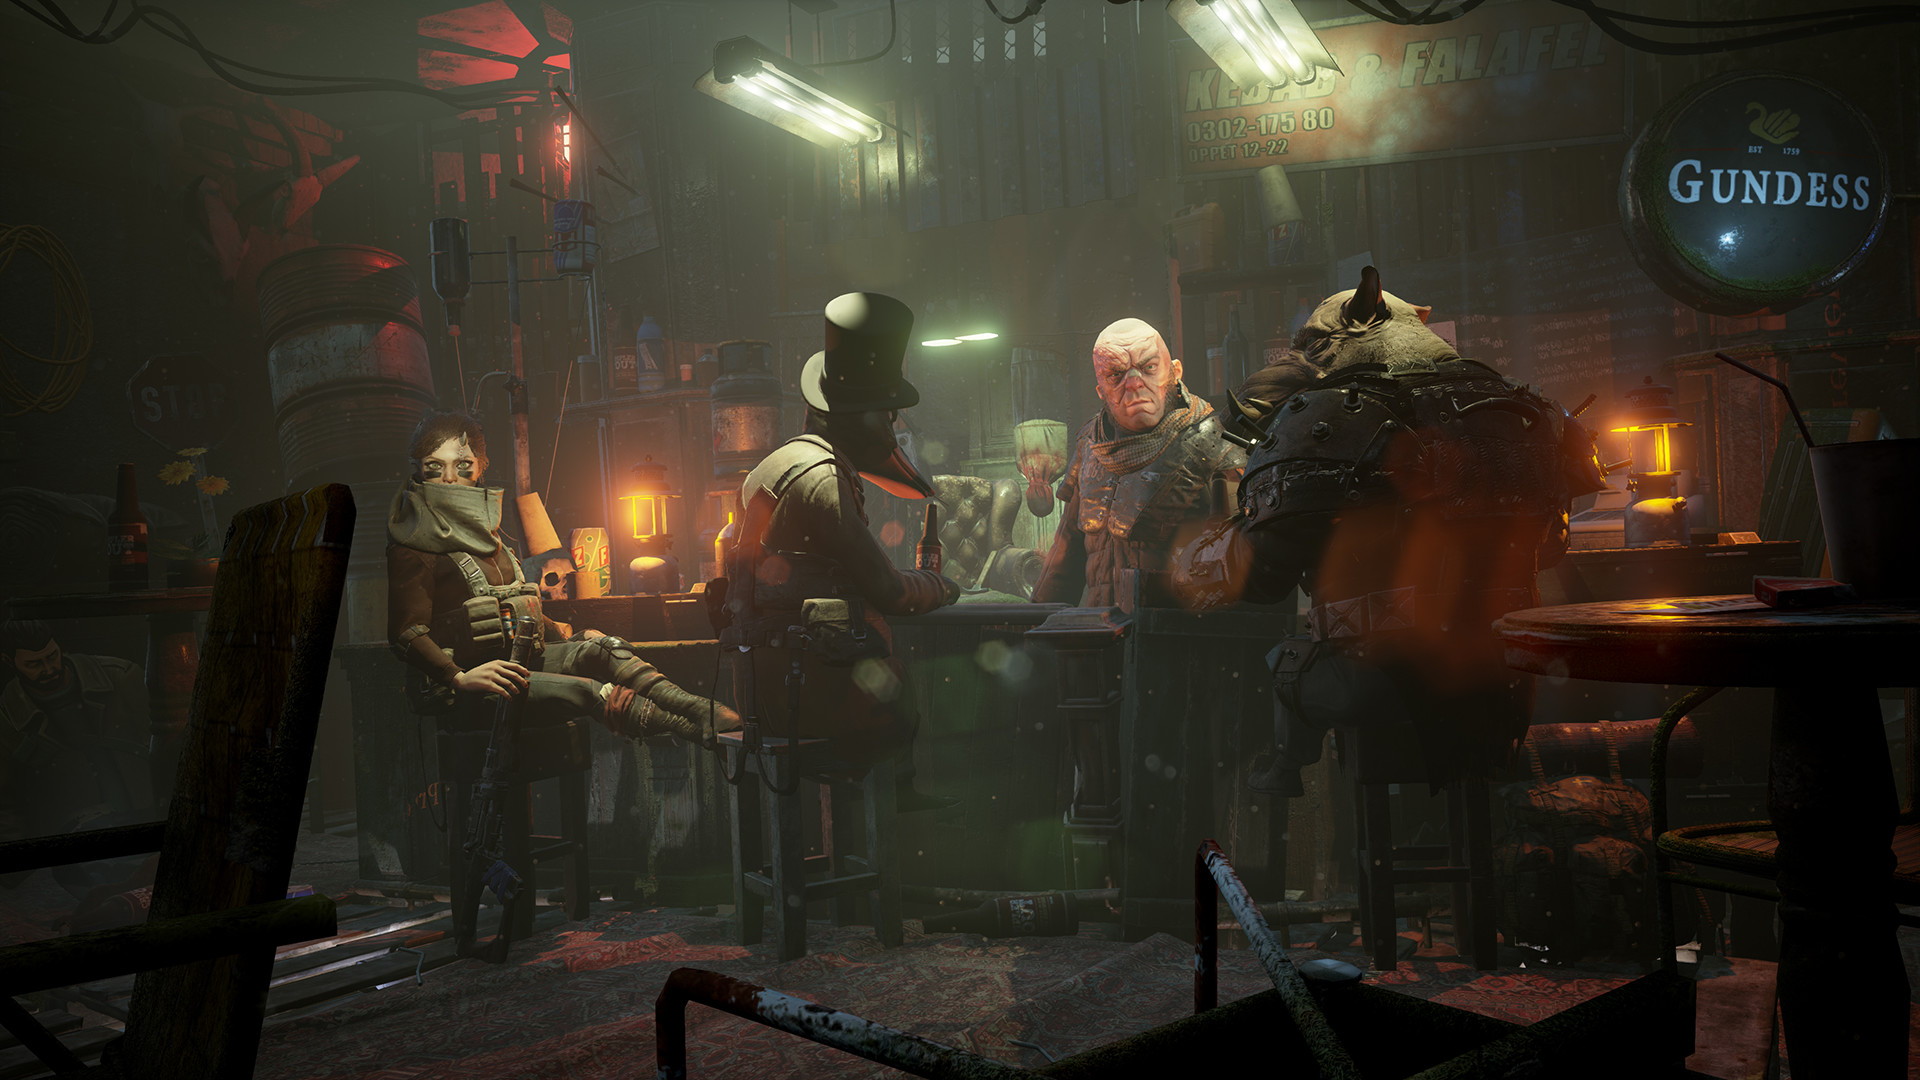 download mutant year zero road to eden review for free